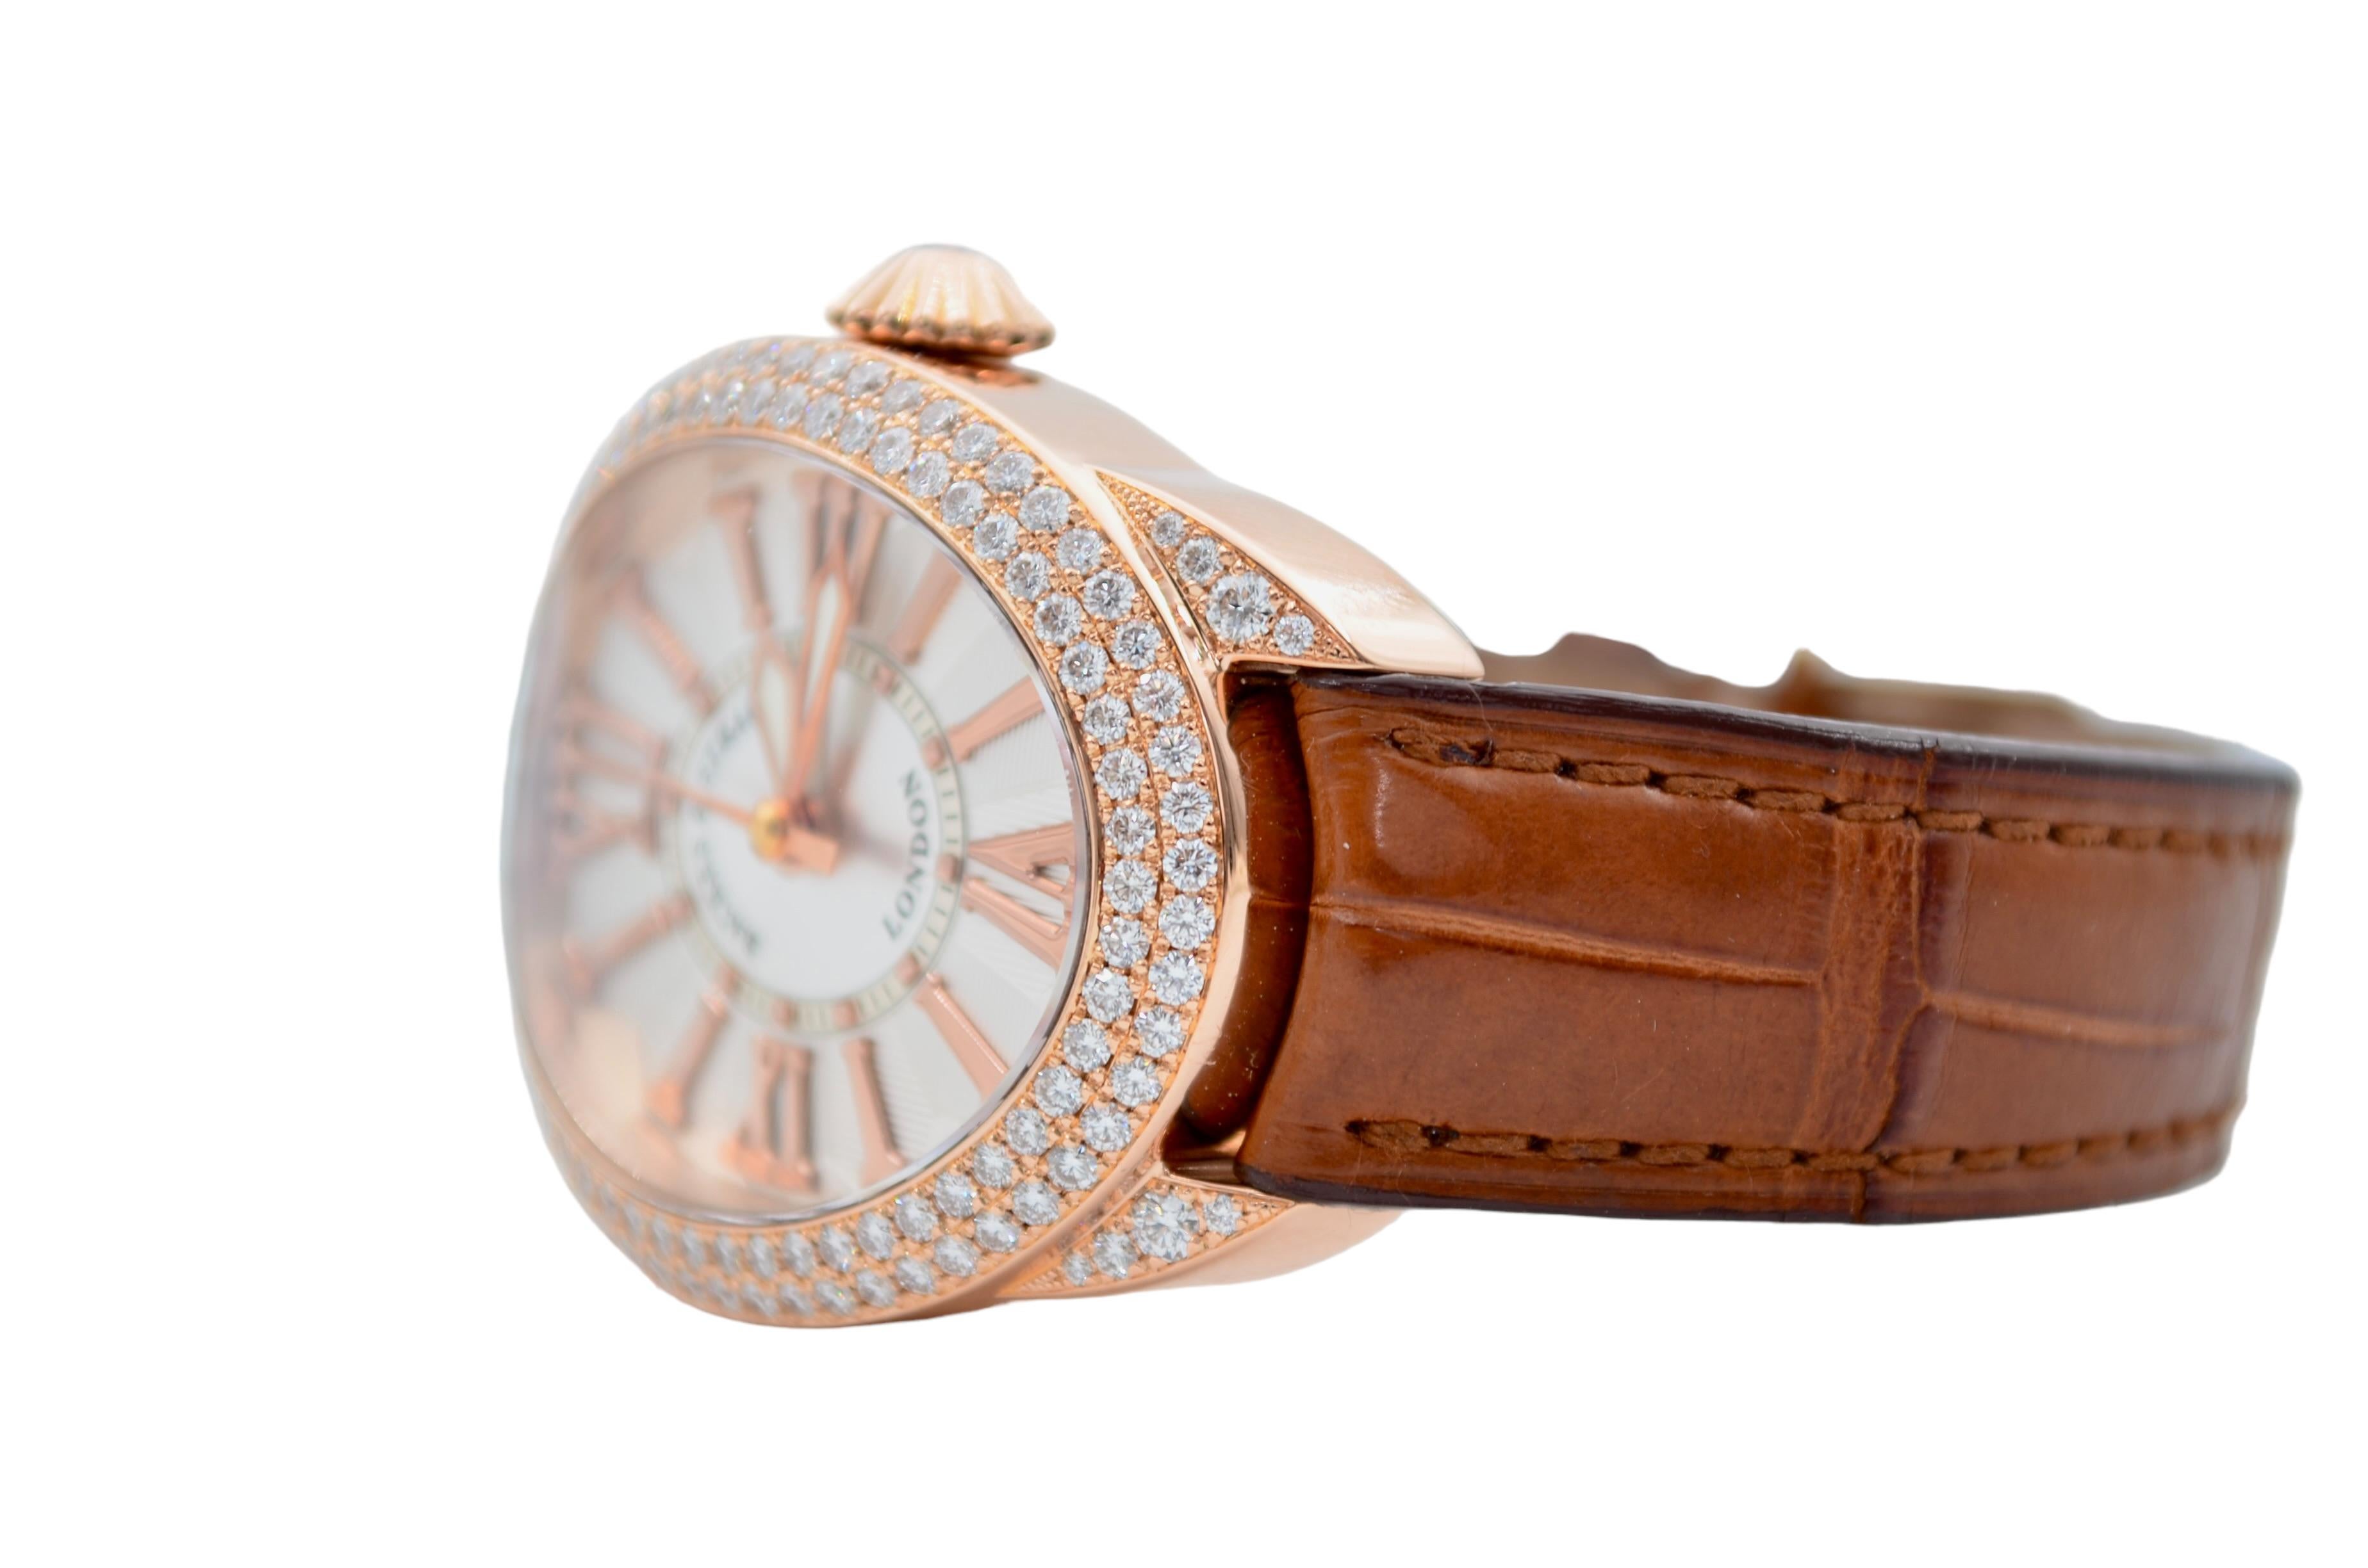 Backes&Strauss Regent Rose Gold 38x32mm Diamonds Leather Strap RE.3238.MA D.2R For Sale 8